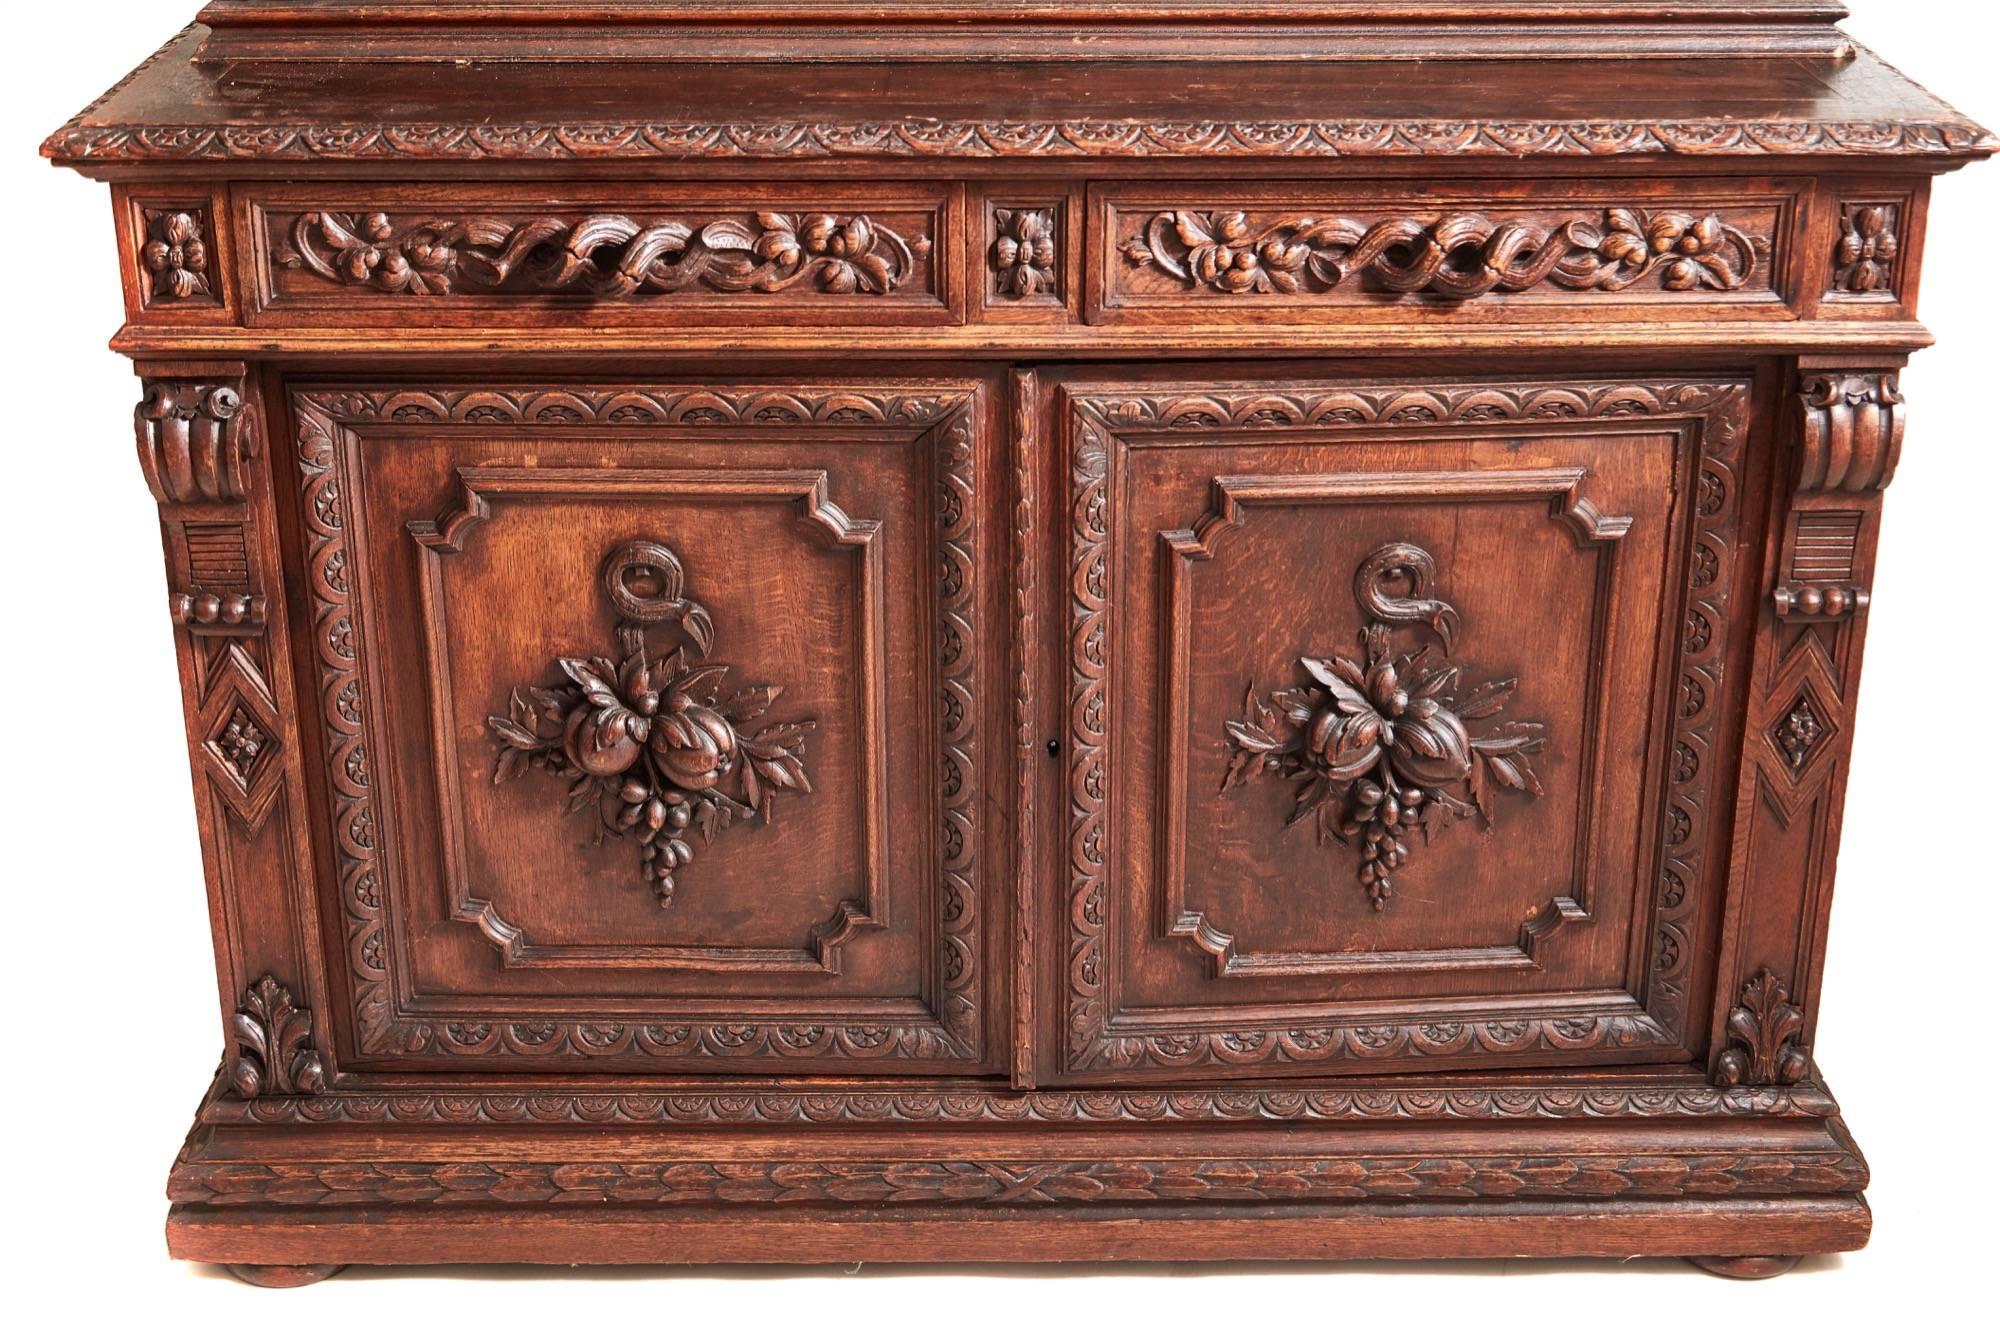 A superb antique heavily carved oak bookcase, the upper section having a carved shaped cornice, heavily carved frieze, two glazed doors, flanked by carved mouldings, four adjustable shelves to the interior, lovely carved sides, the base section